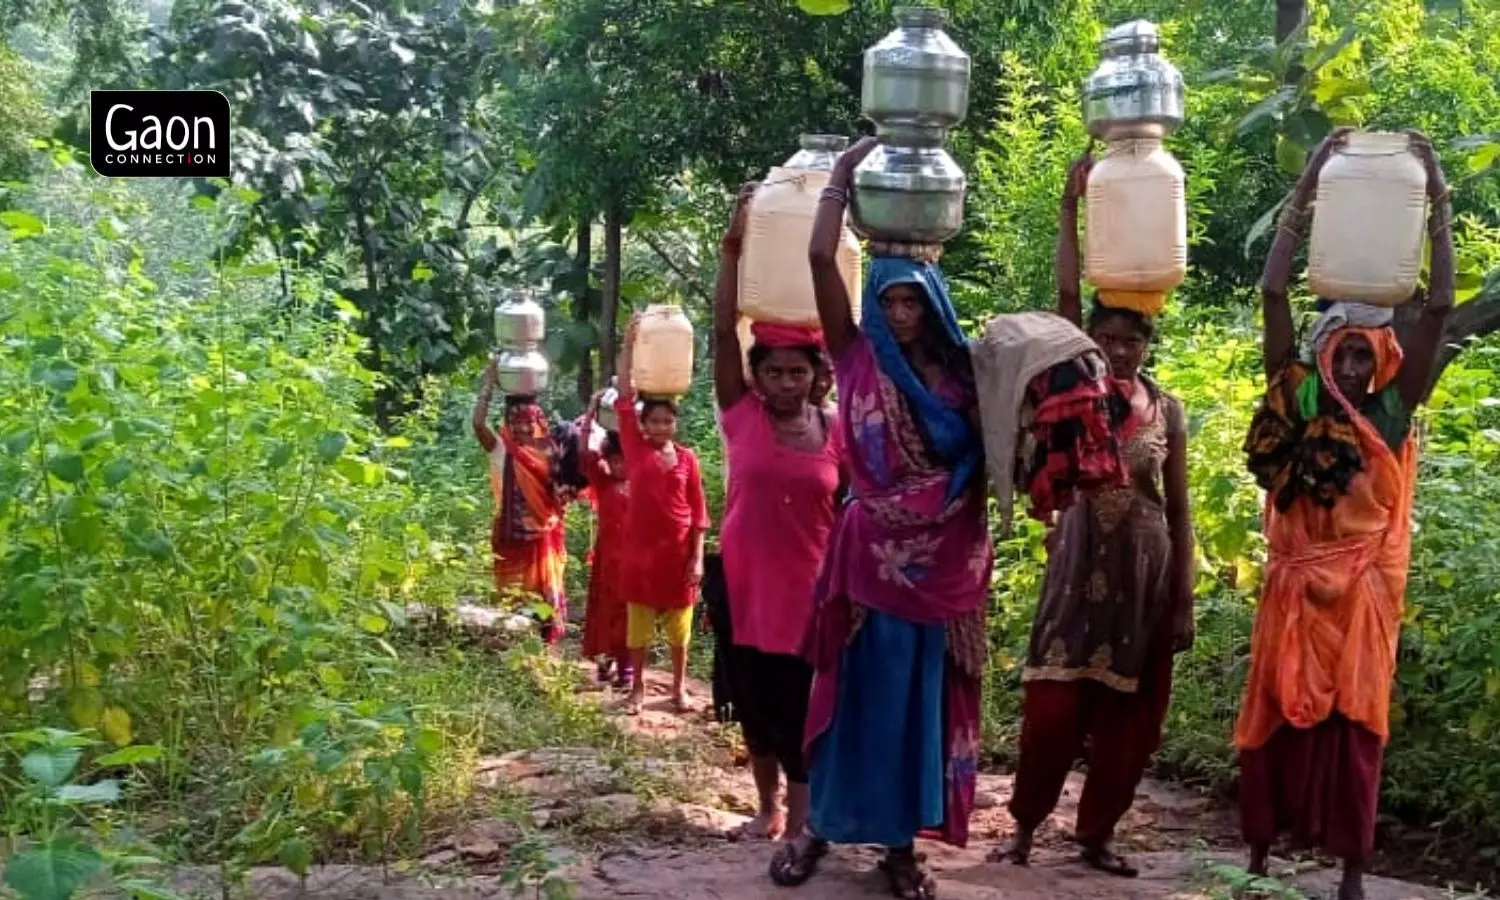 Tribal women in the buffer of Panna Tiger Reserve brave wild animals and dangerous slopes to fetch water